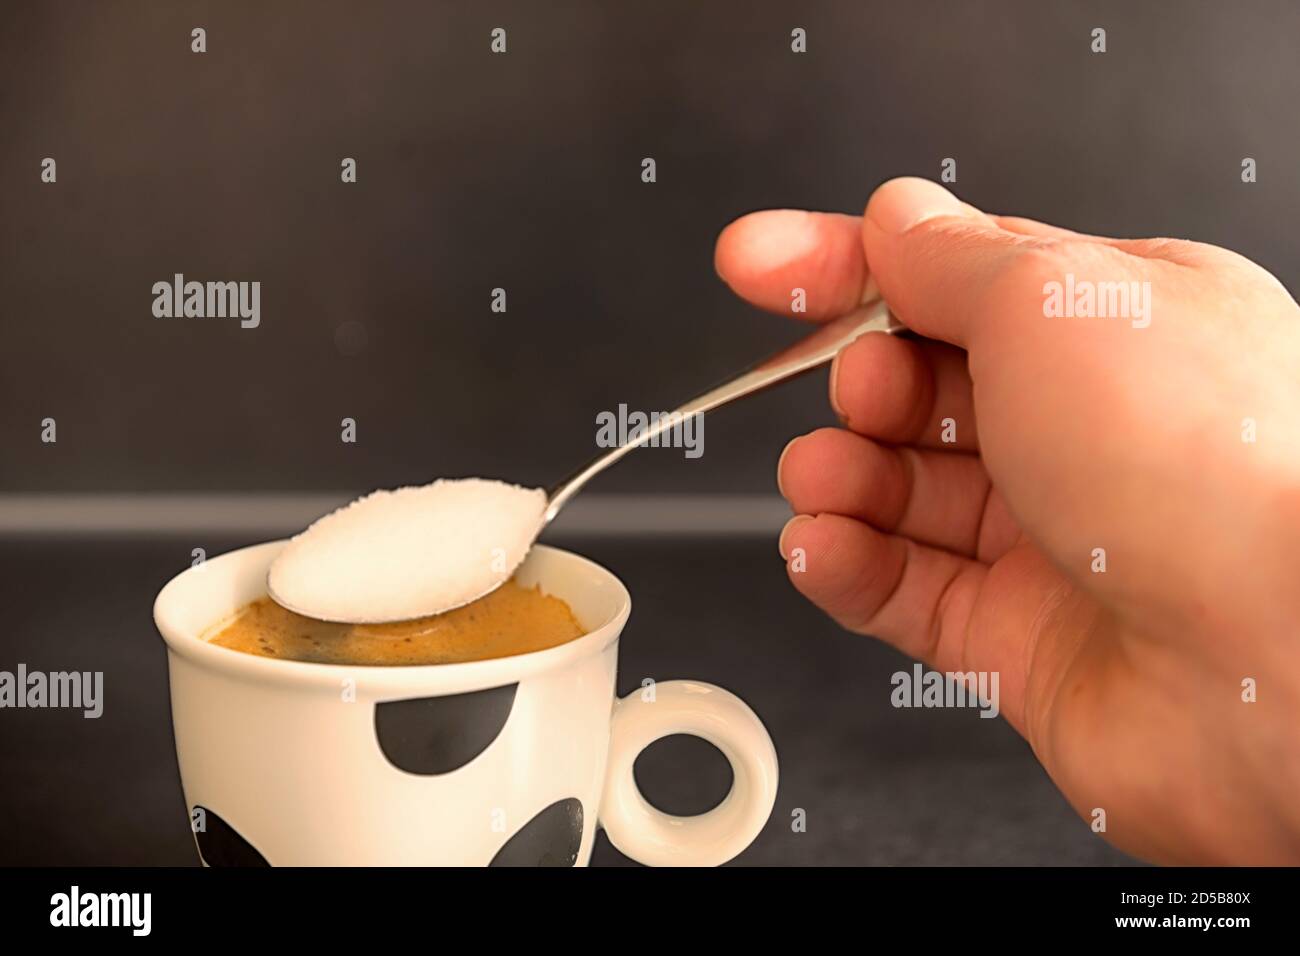 Hand holding a spoon, adding sugar to coffee. Stock Photo